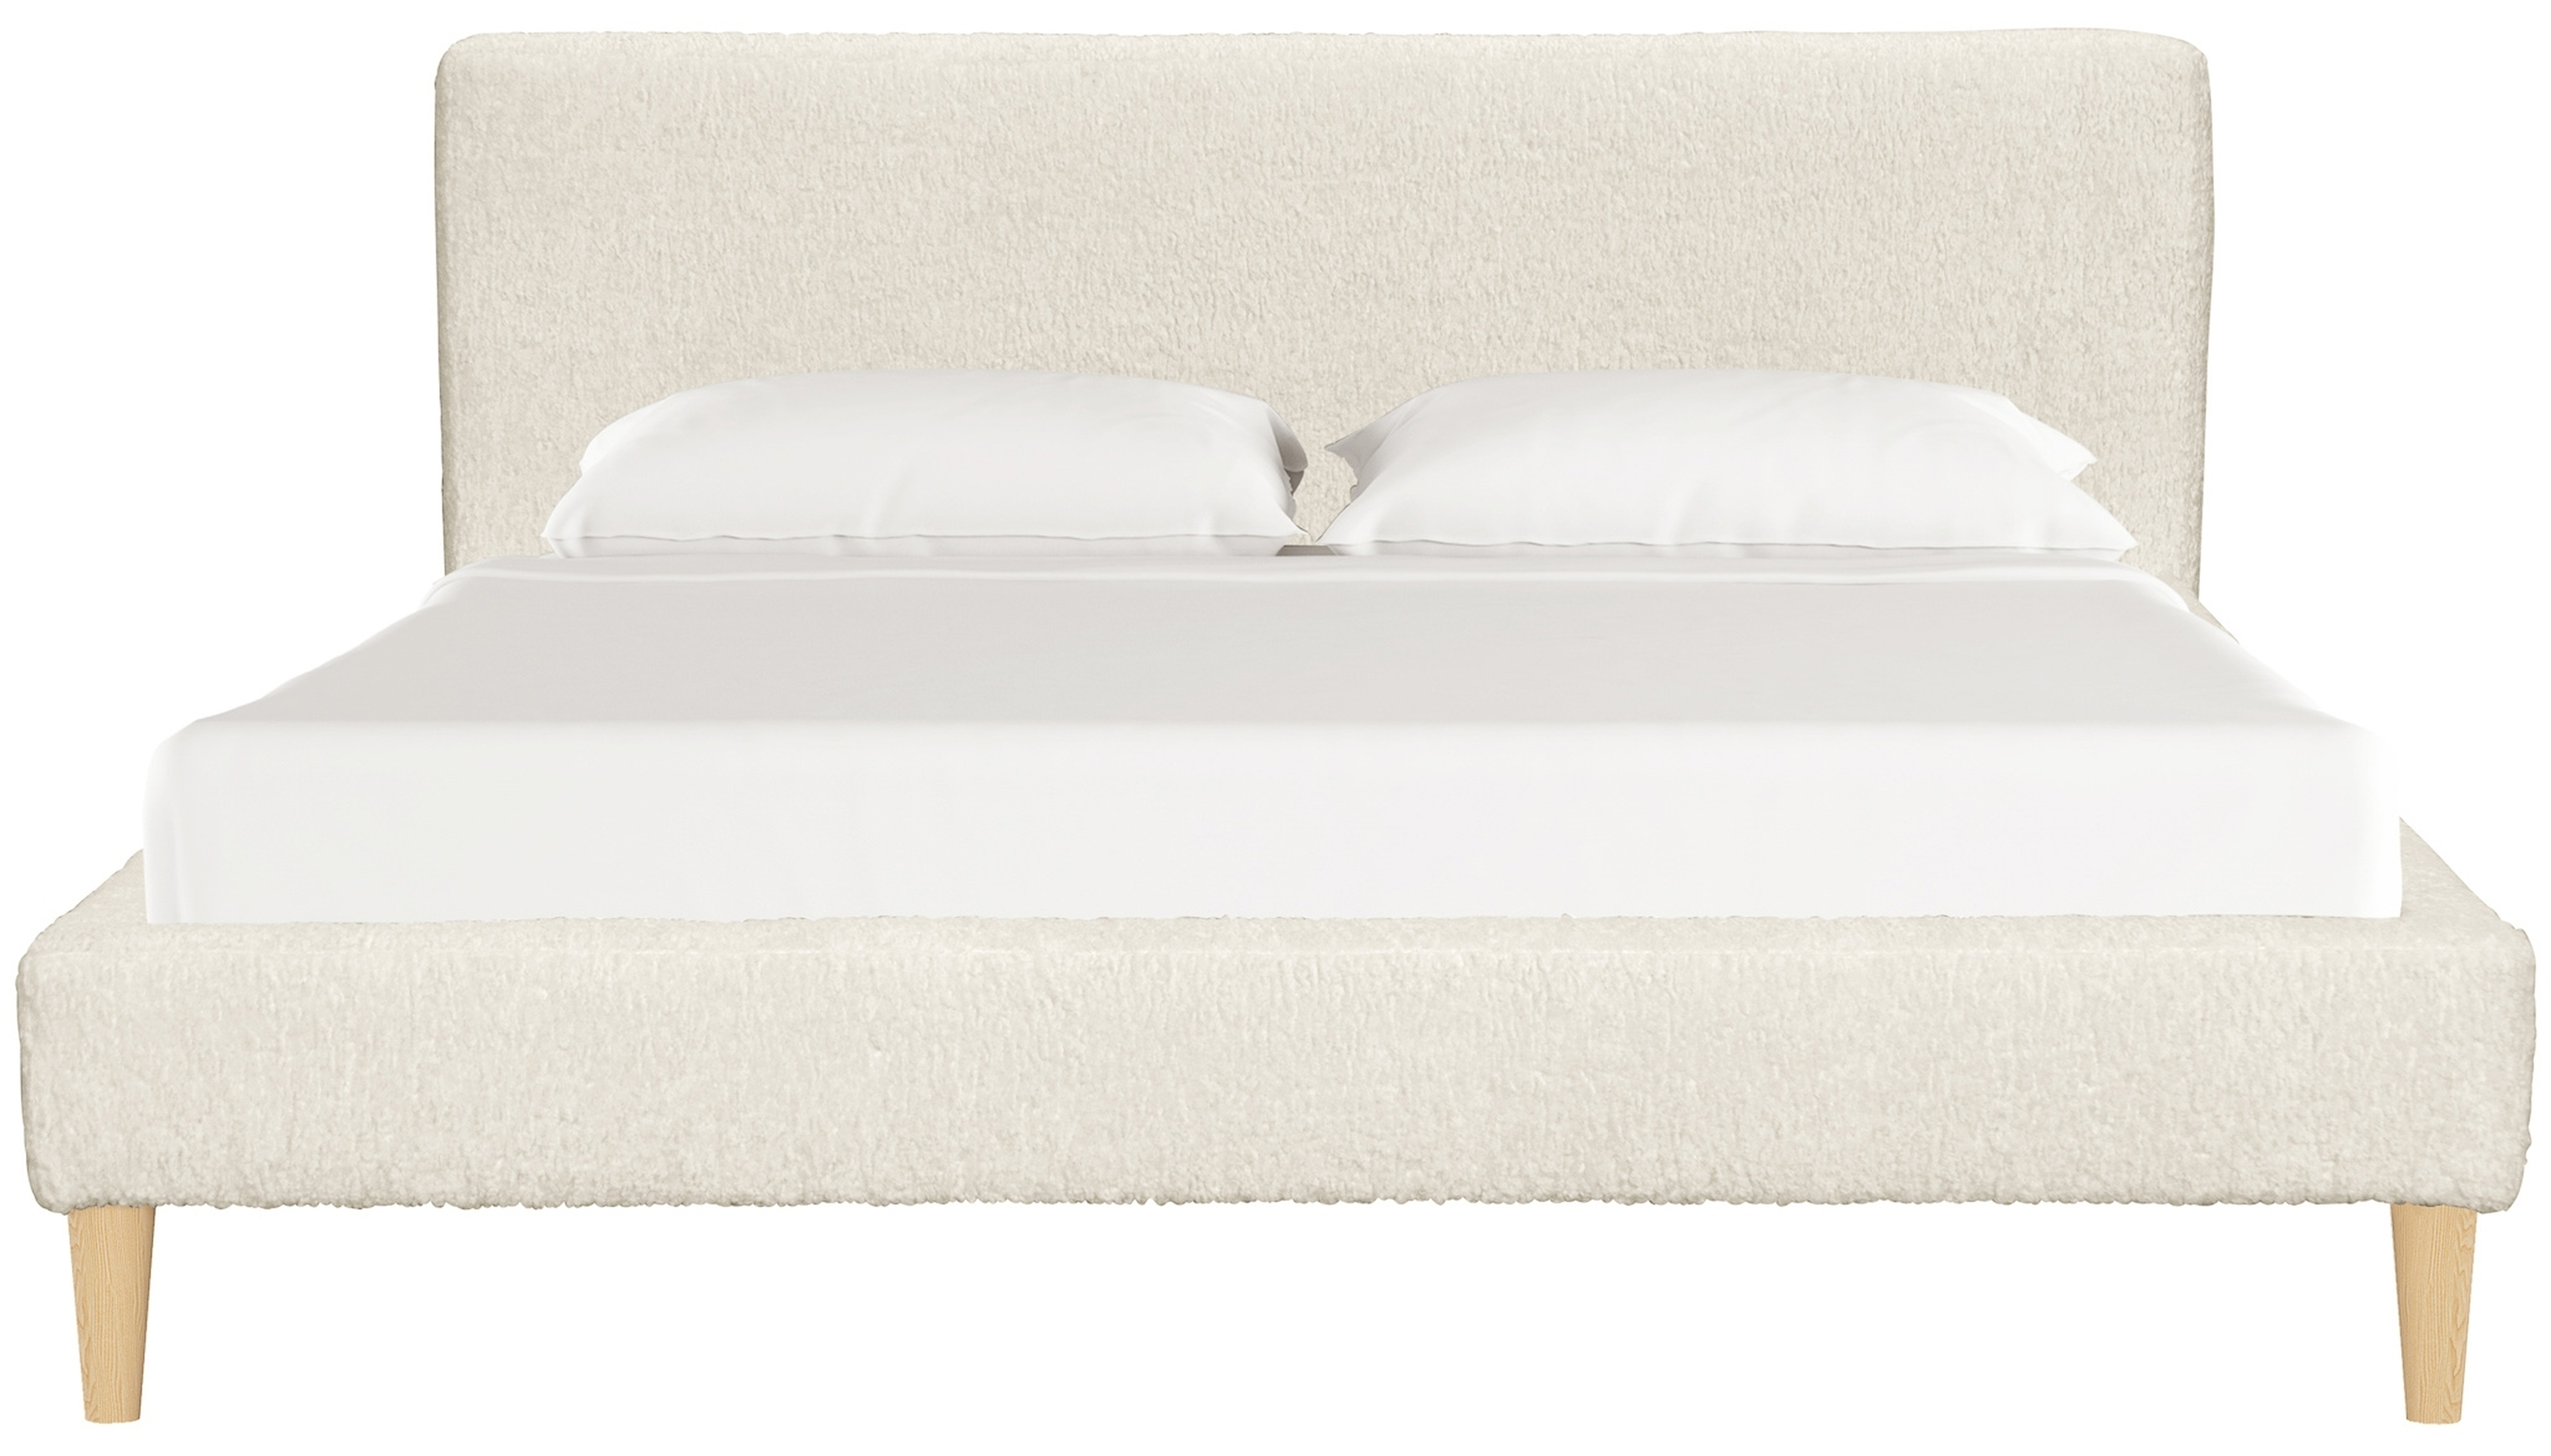 Indrea Platform Bed, Sherpa Queen - Lulu and Georgia